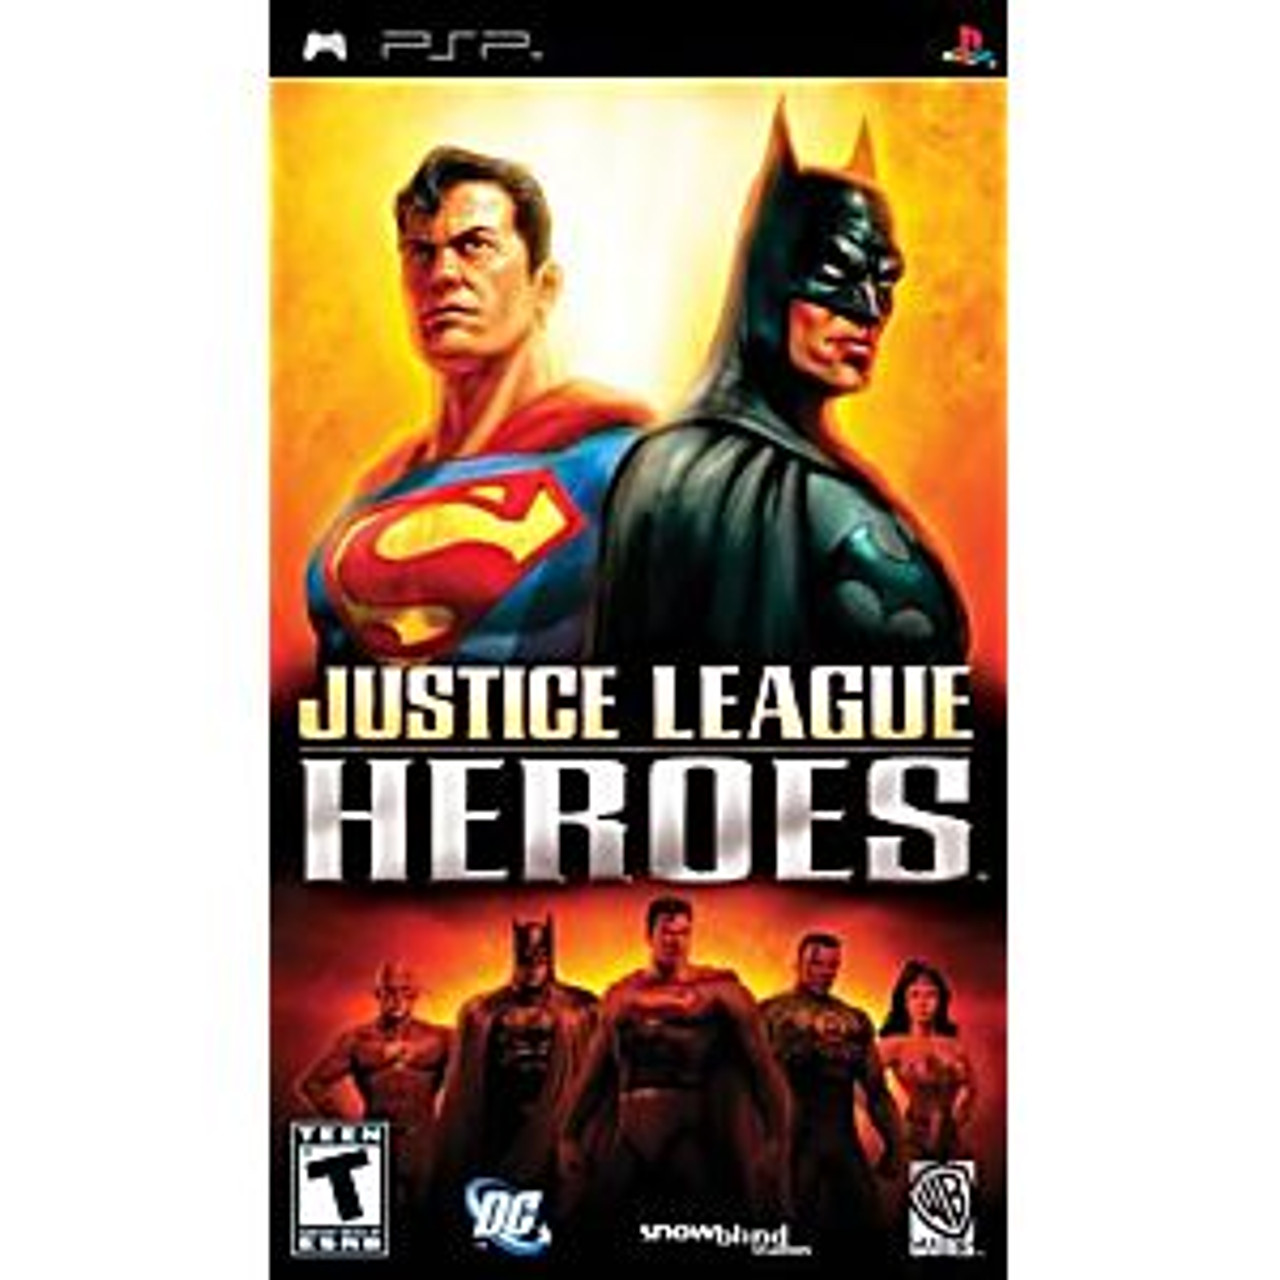 JUSTICE LEAGUE HEROES - PSP